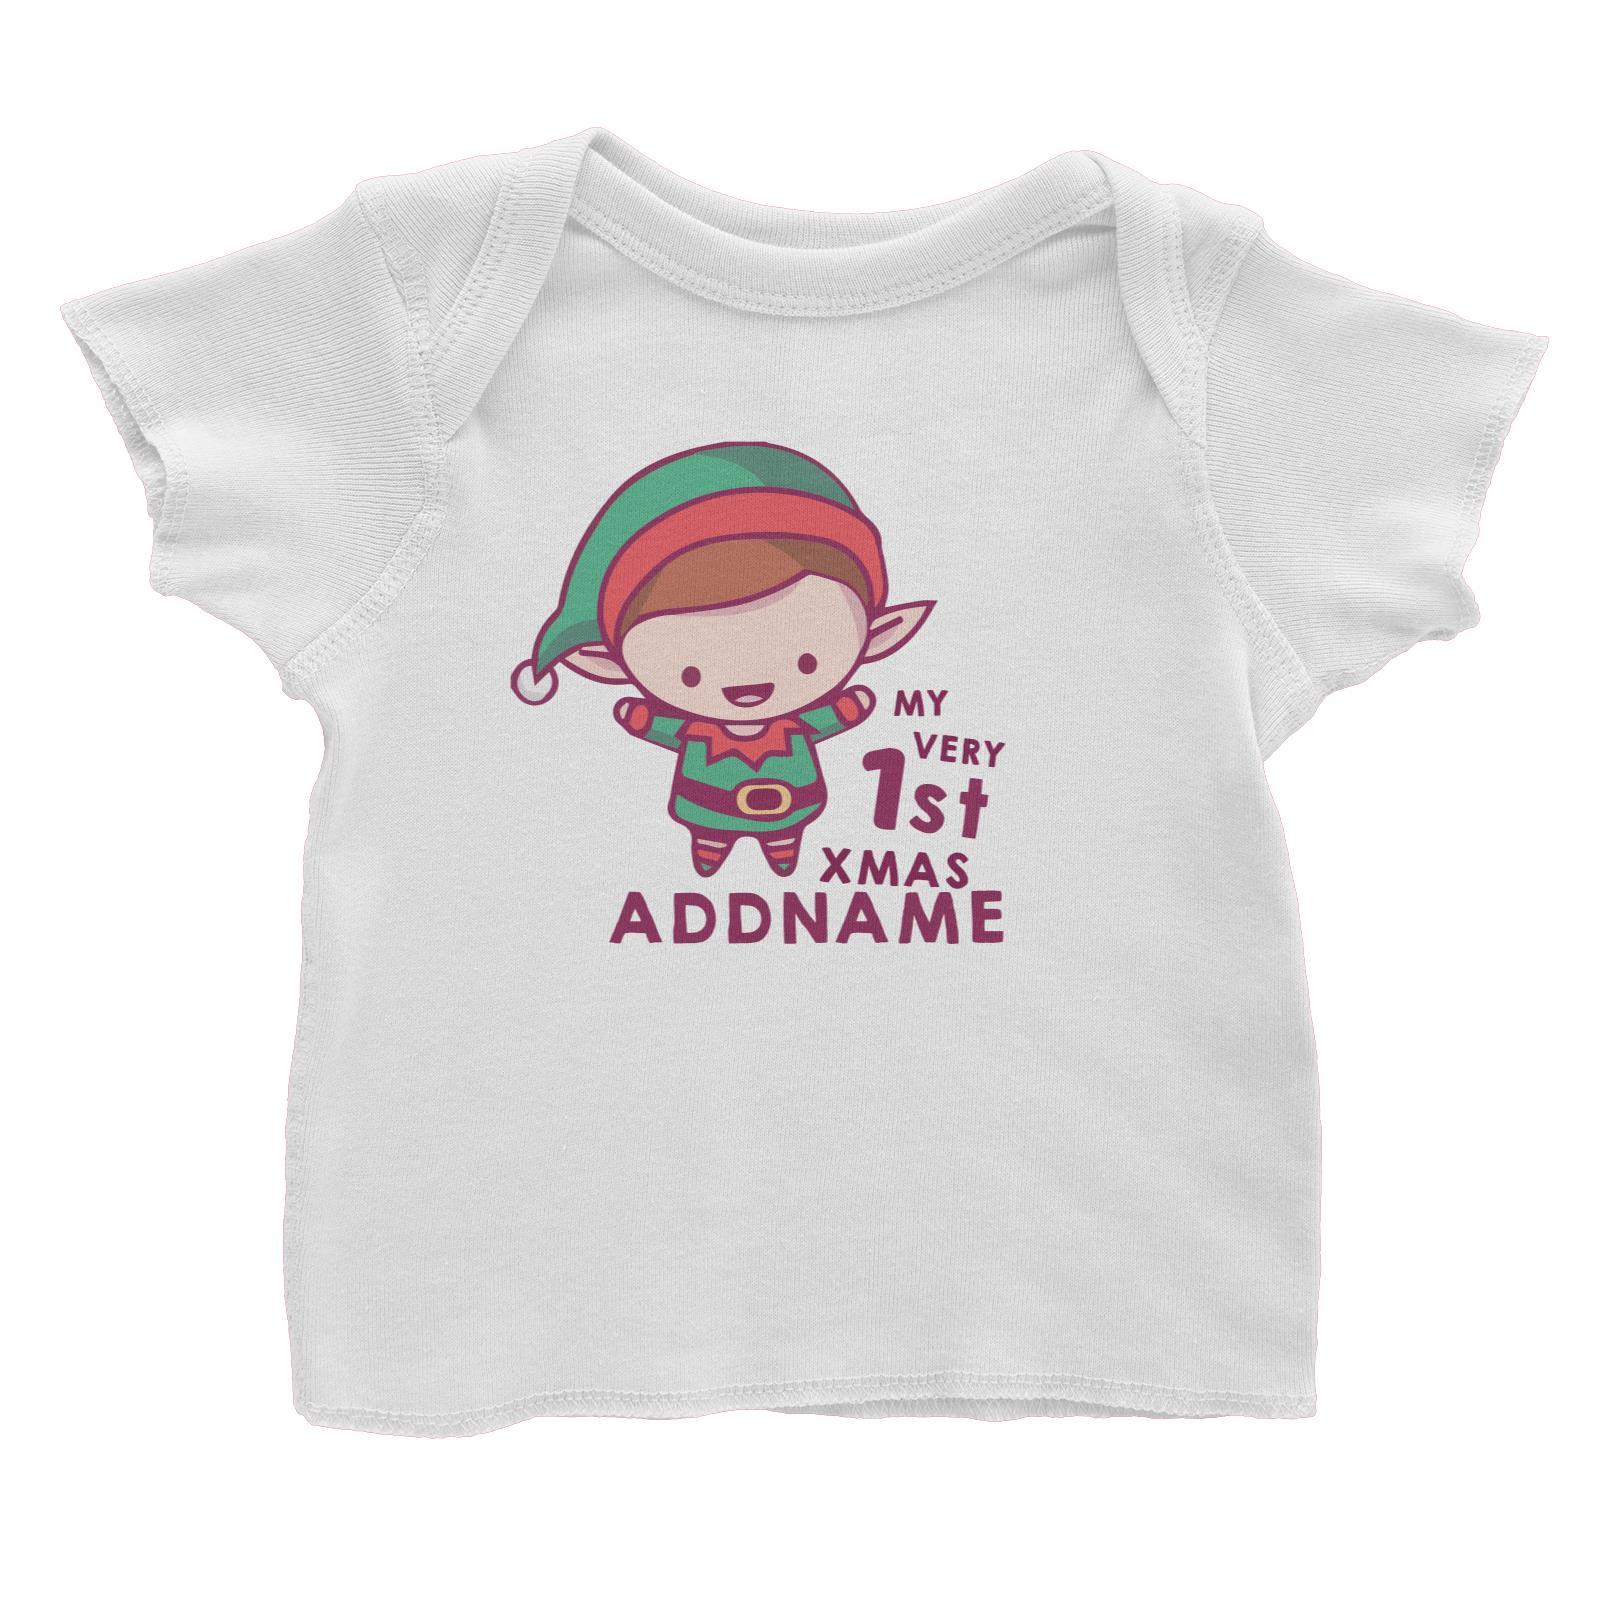 Christmas My Very 1st Elf Addname Baby T-Shirt